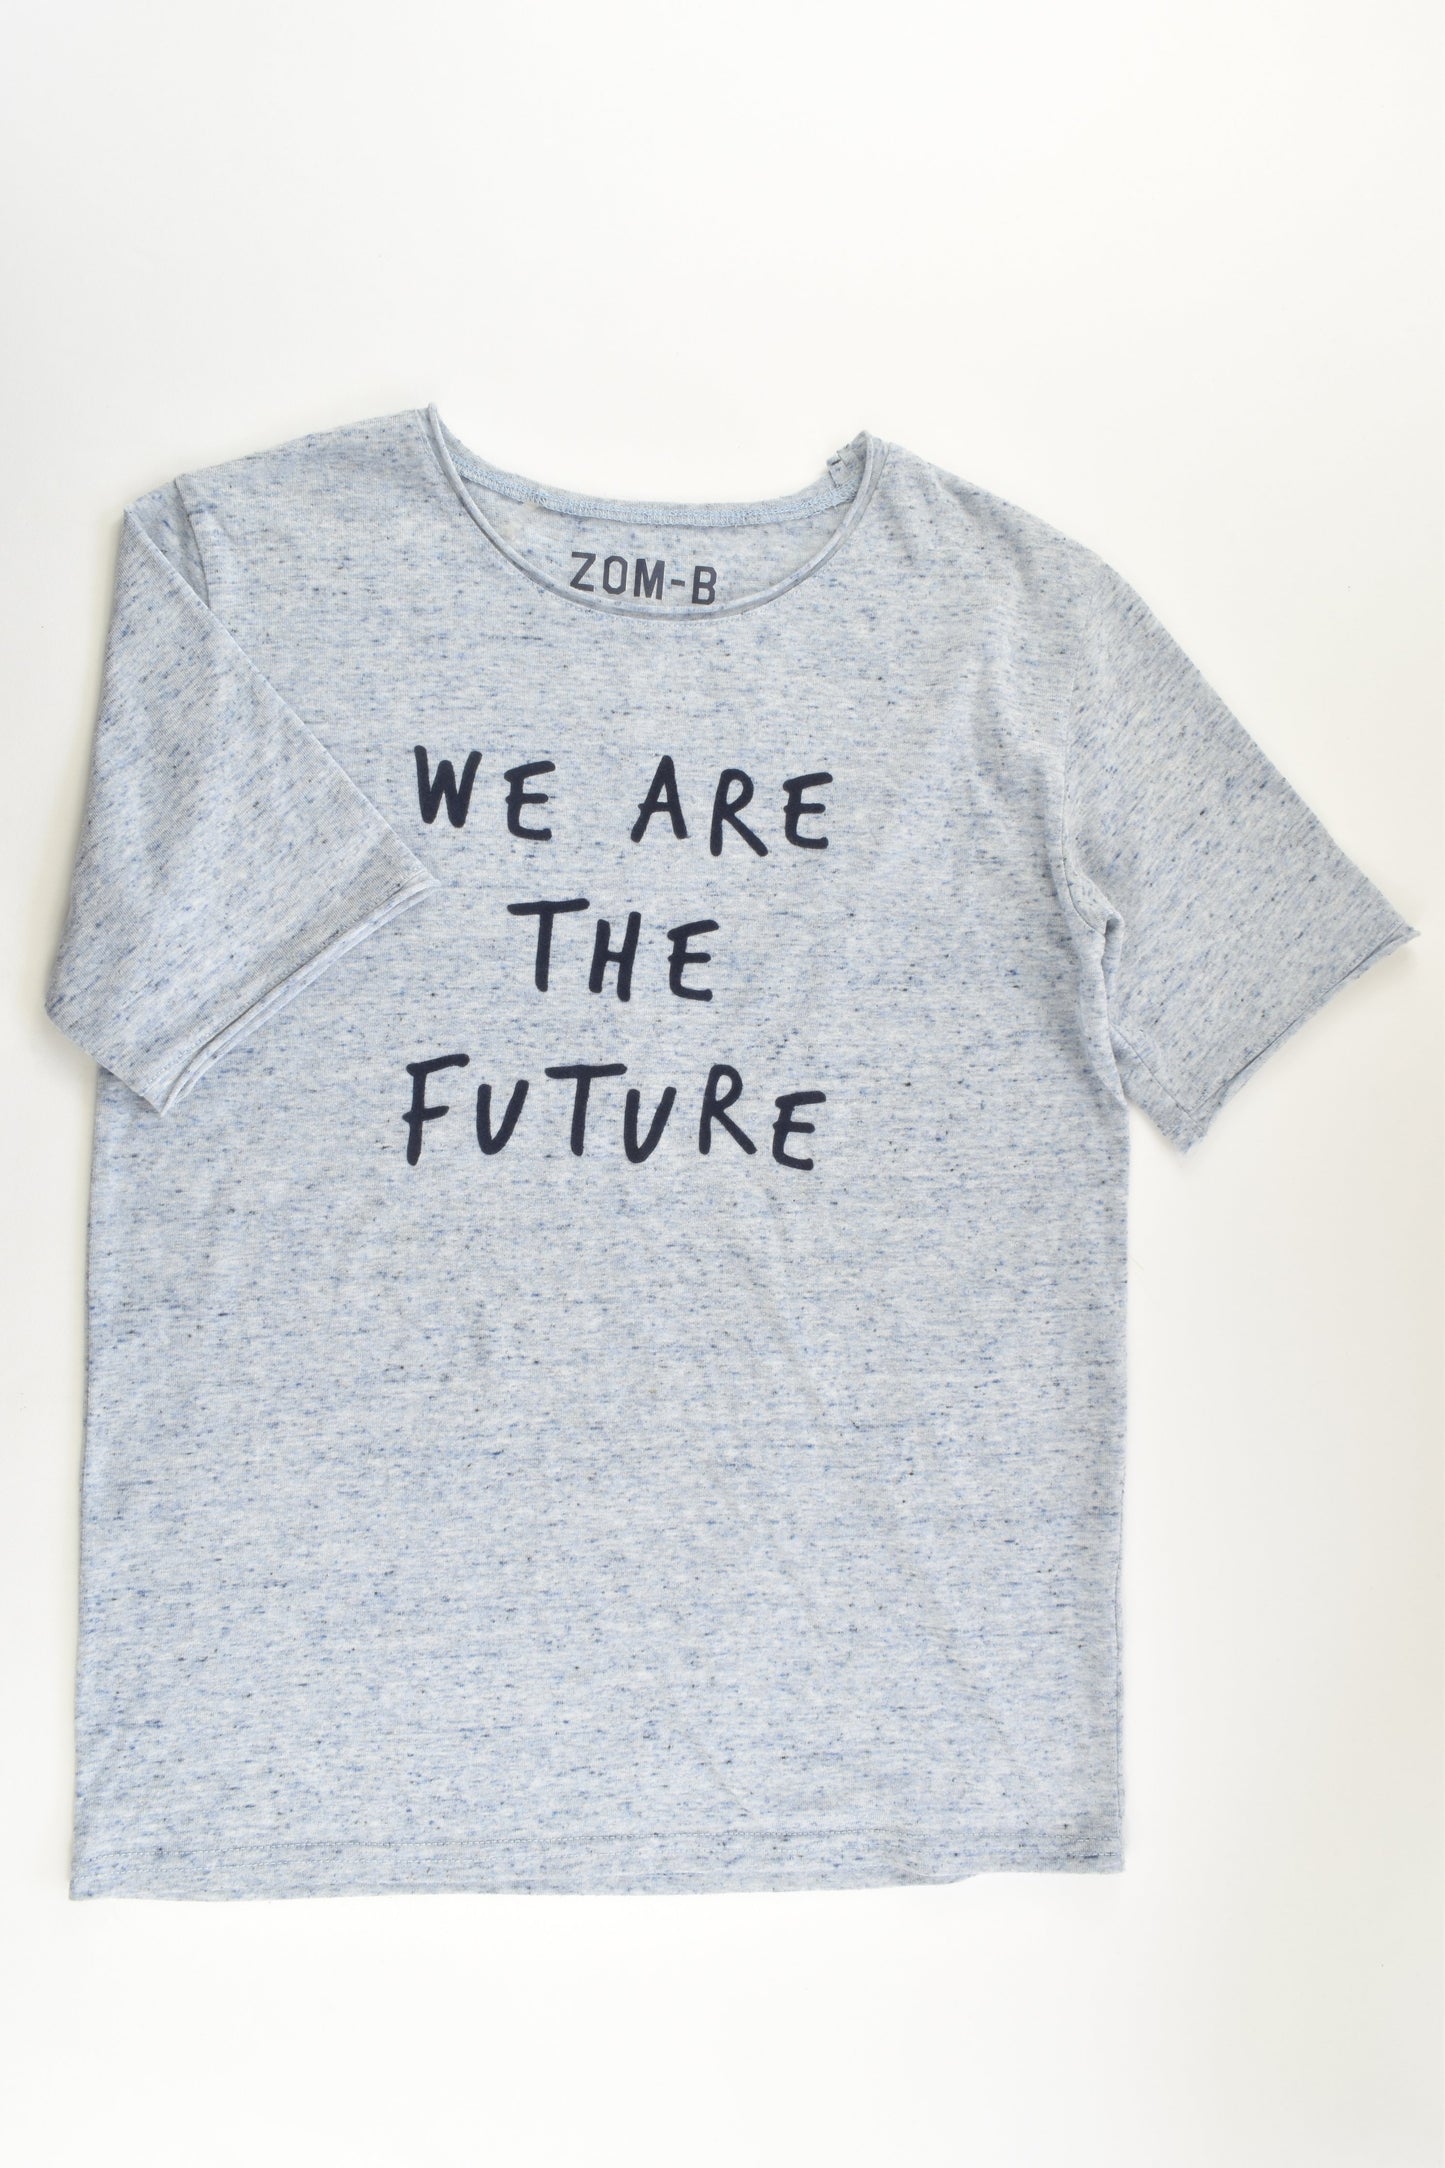 Zom-B Size 14 'We Are The Future' T-shirt